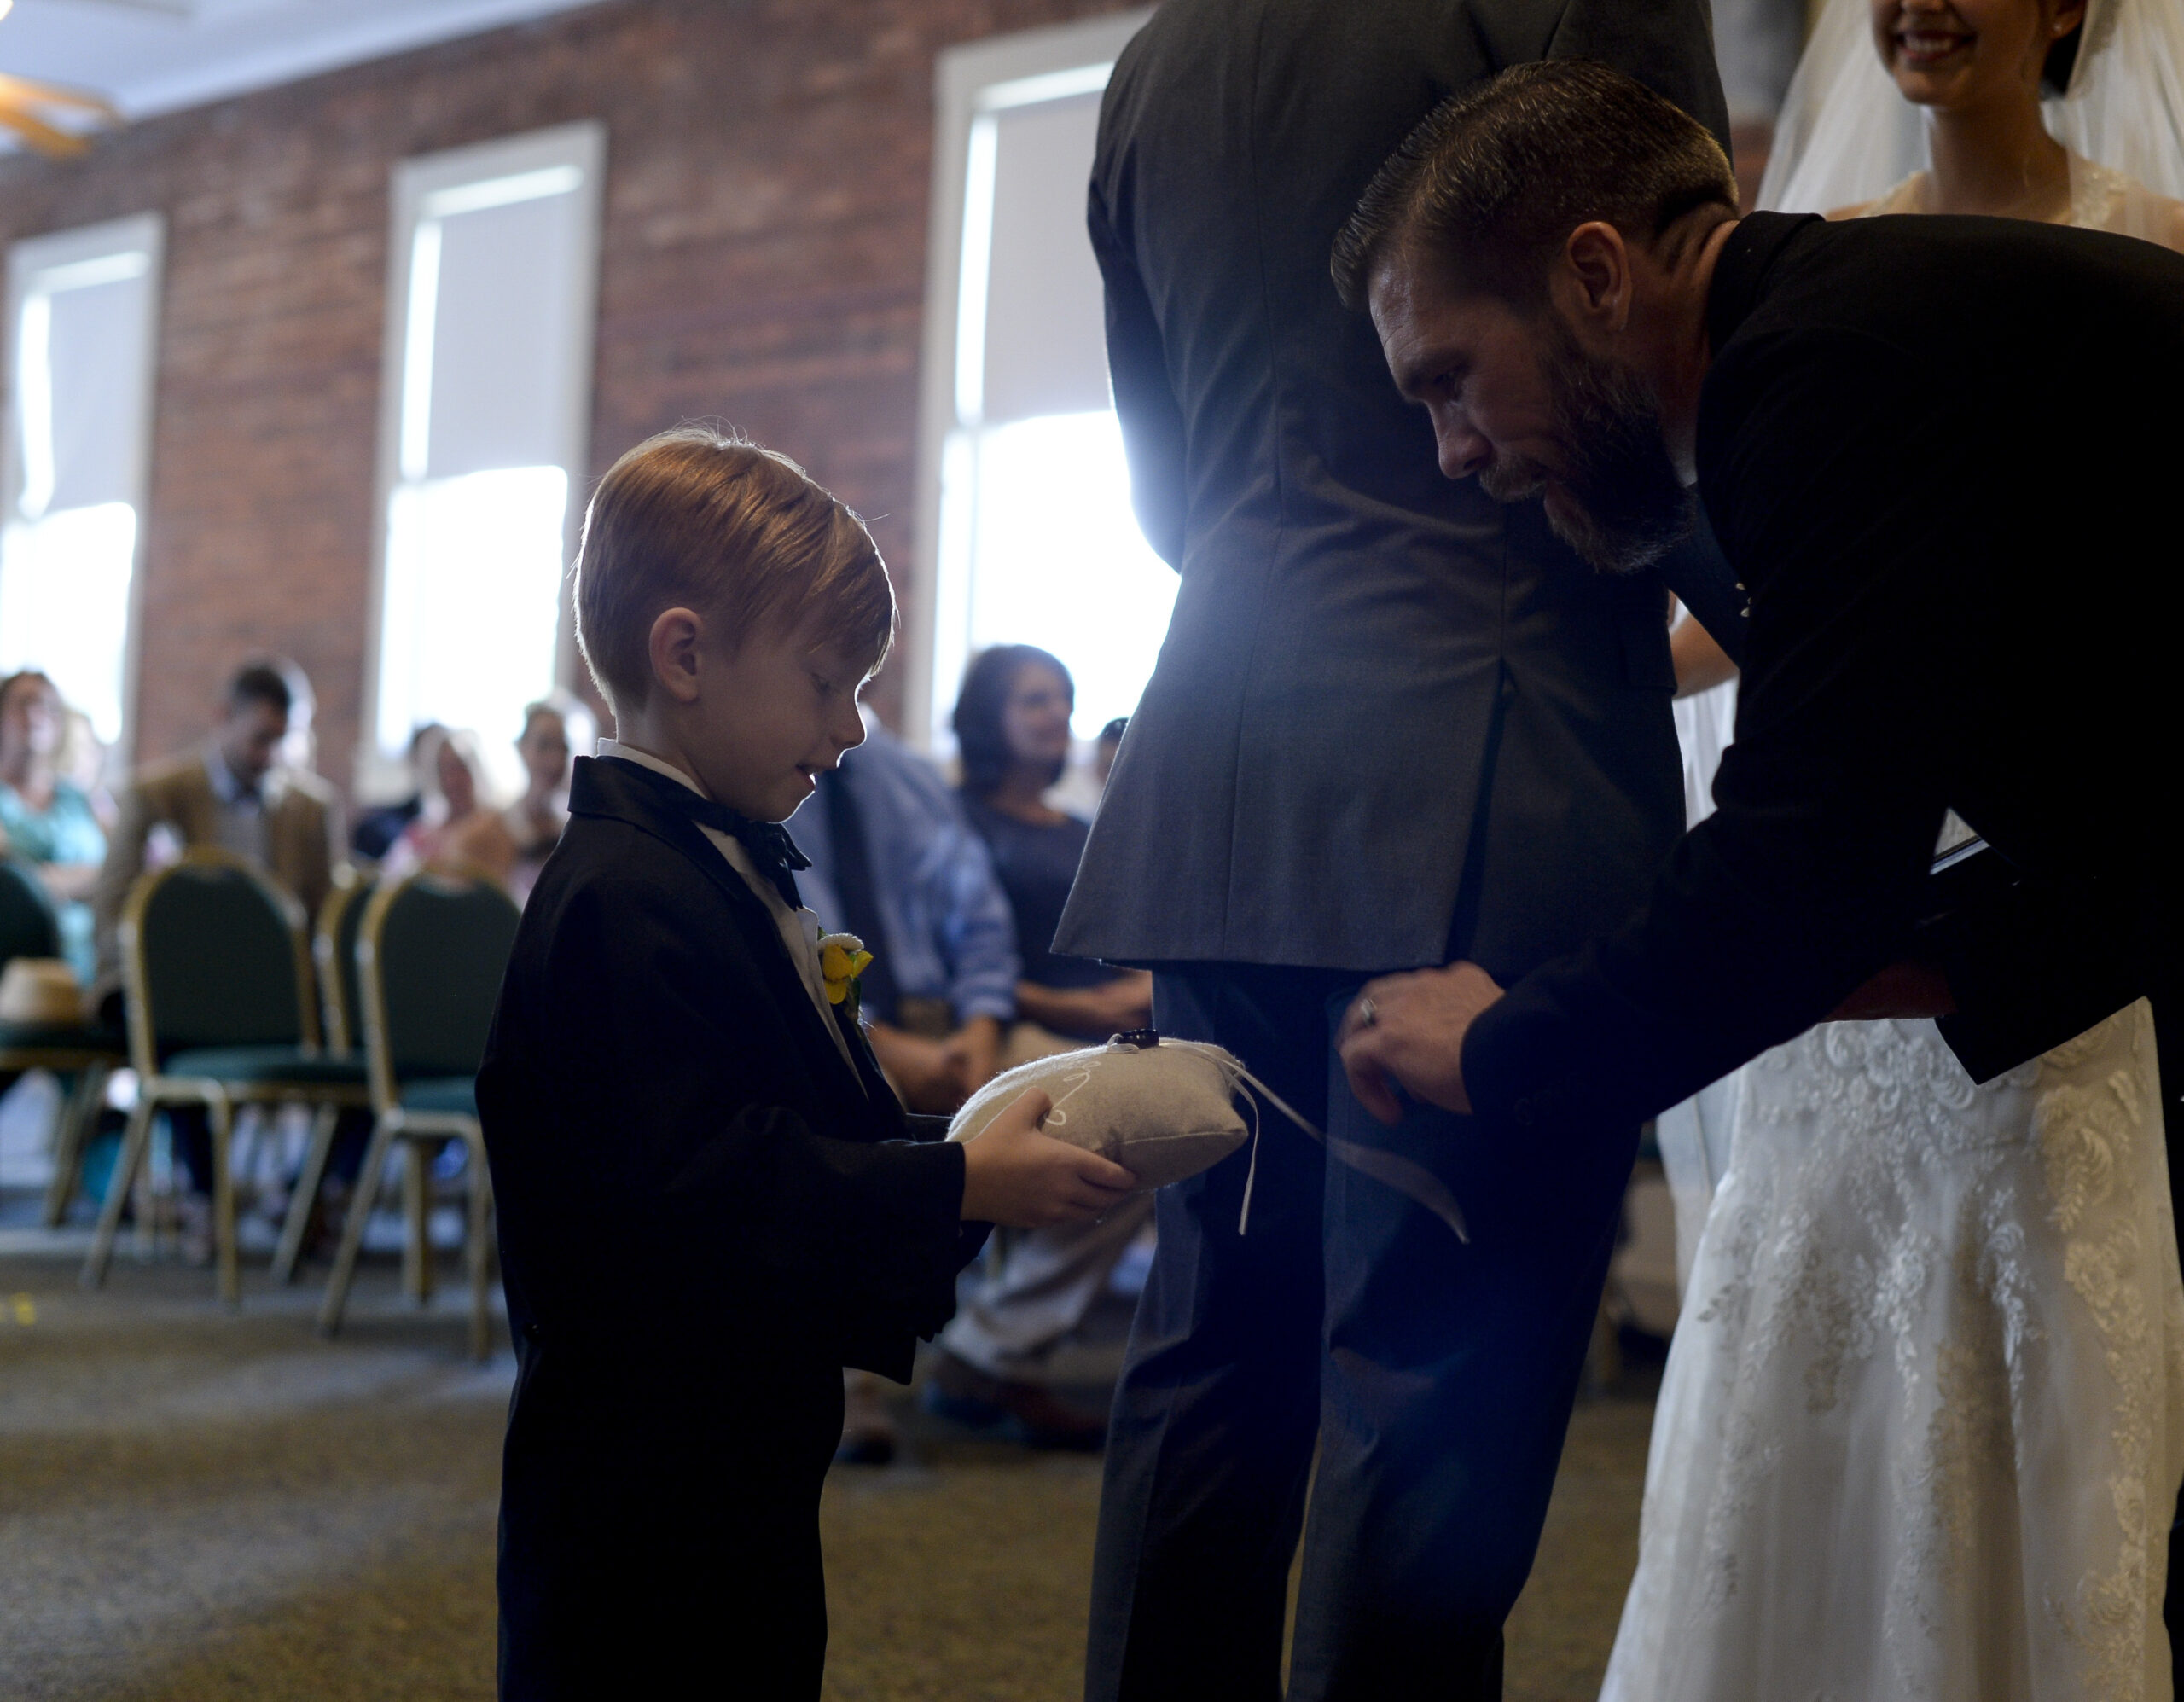 The ring bearer presents the rings to the Pastor at a wedding in Waycross, Georgia, July 2, 2017. The marriage between two military members was witnessed by friends and family. (U.S. Air Force photo by Airman 1st Class Kristen Heller)